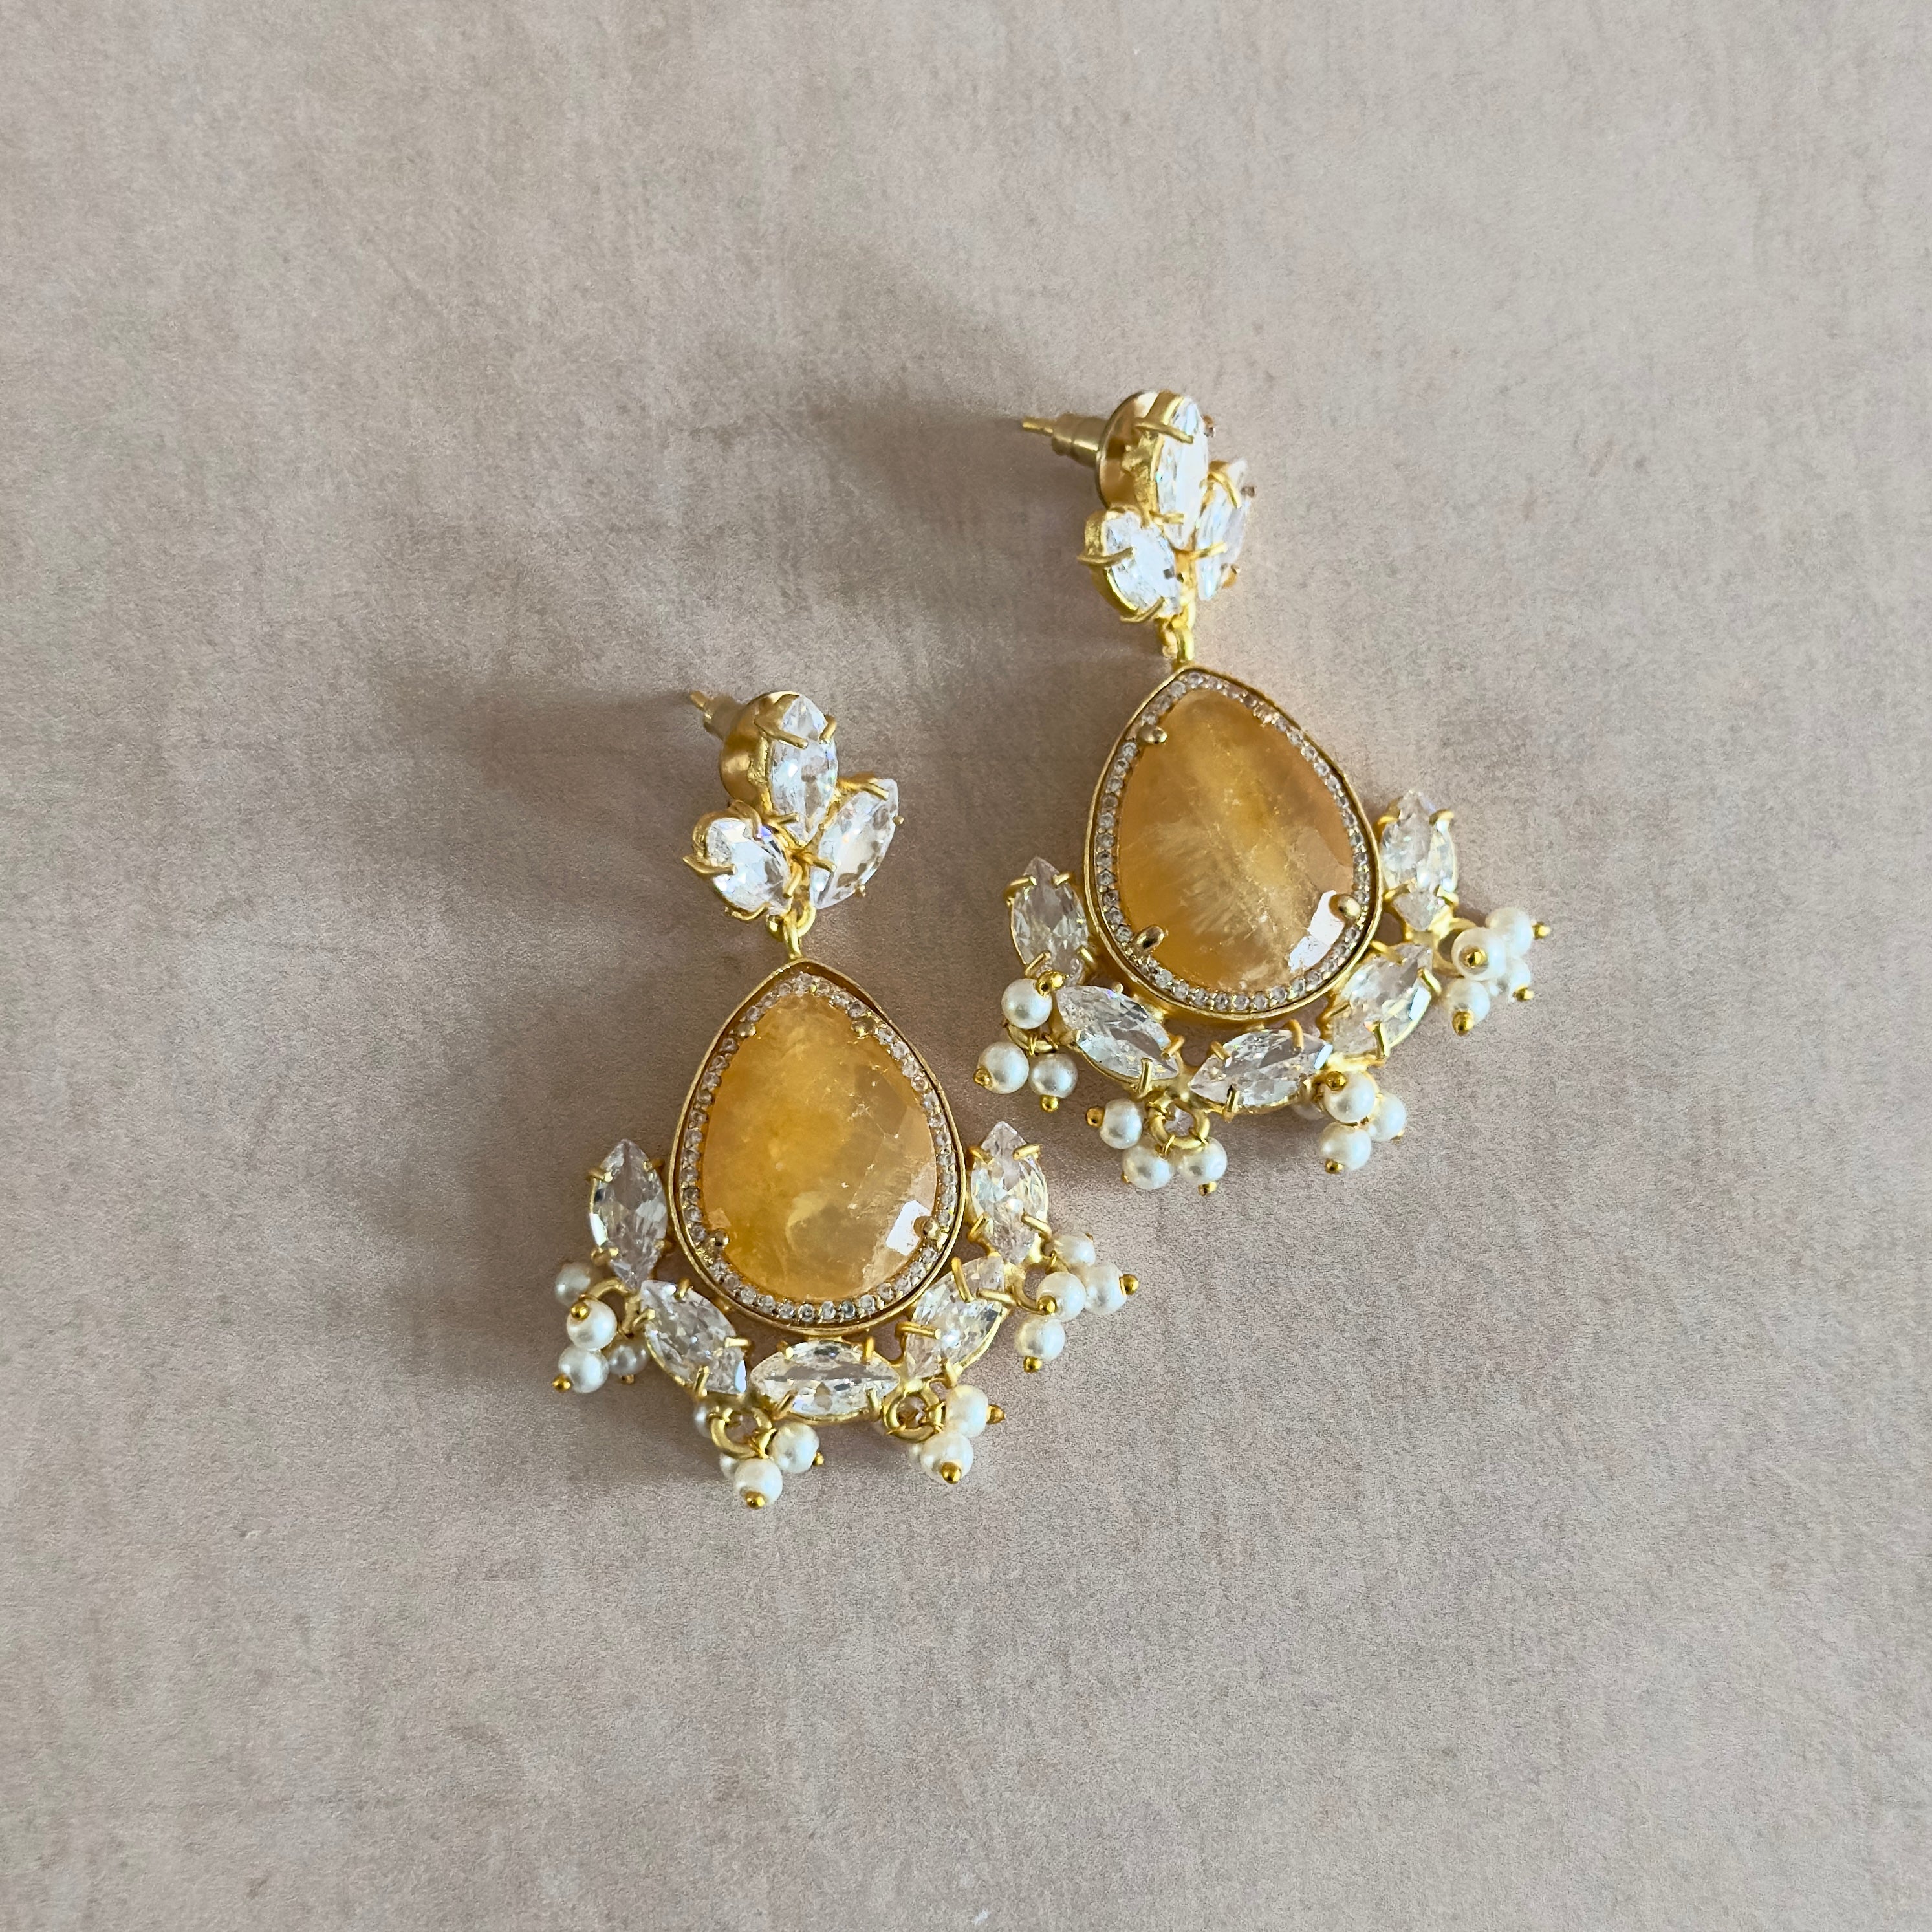 Feel the sparkling sensation with our Felice Crystal Drop Earrings featuring stunning lemon quartz and cz crystals. The perfect accessory to add a touch of elegance to any outfit. Shine bright and stand out in style!